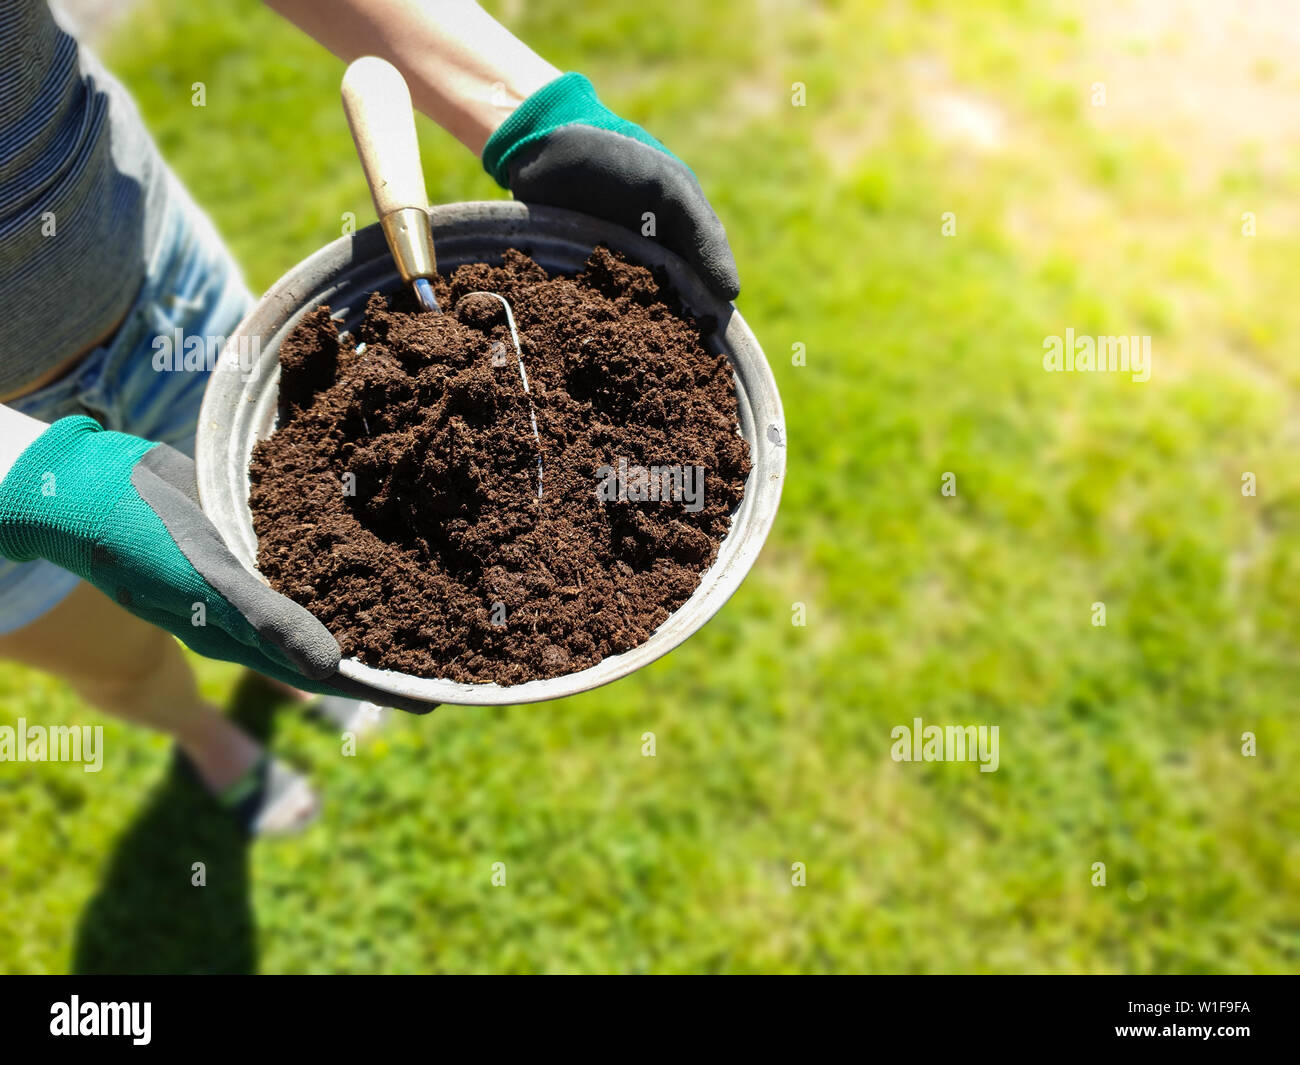 Concept for green organic gardening and agriculture. Hands in rubber gloves holds a metal bucket with soil and tool. Stock Photo